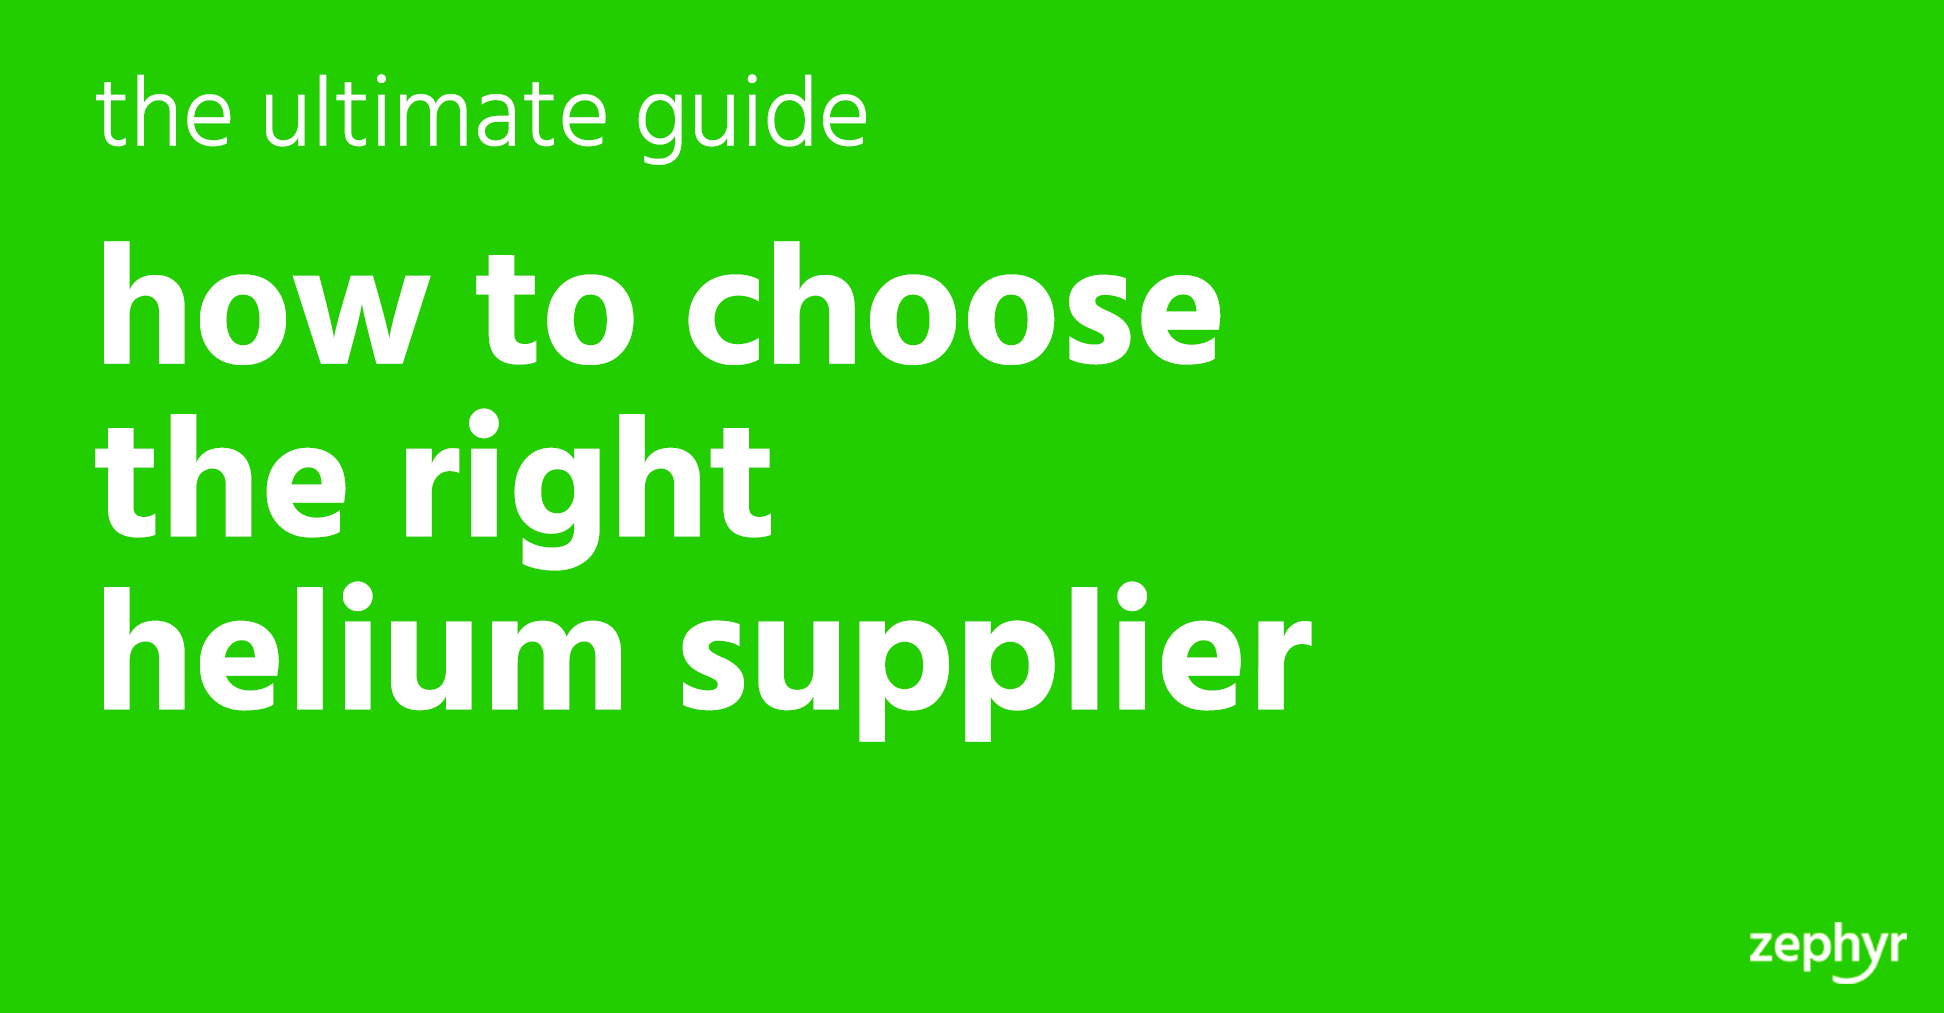 How to choose the right helium supplier